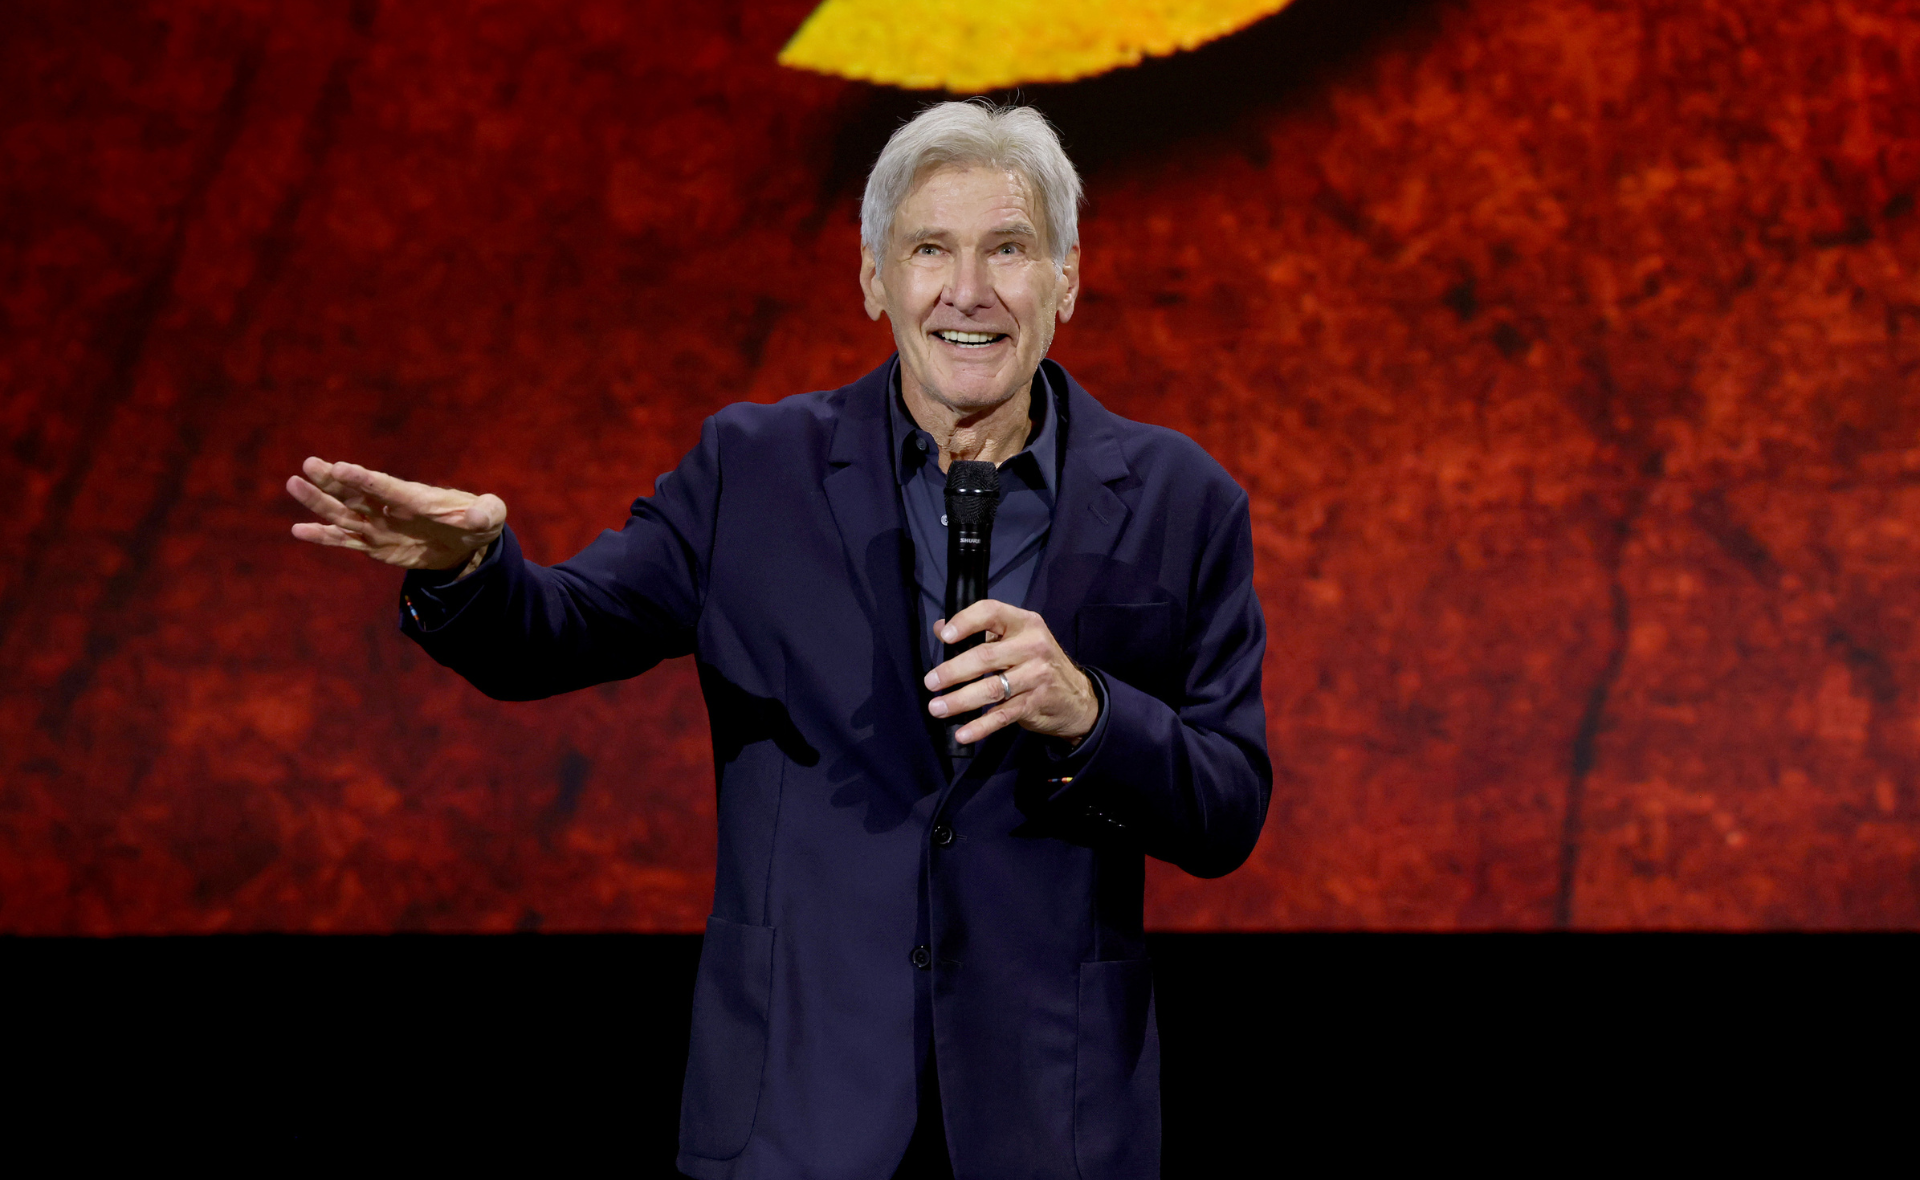 “It means the world to me”: Harrison Ford shares an emotional farewell to Indiana Jones